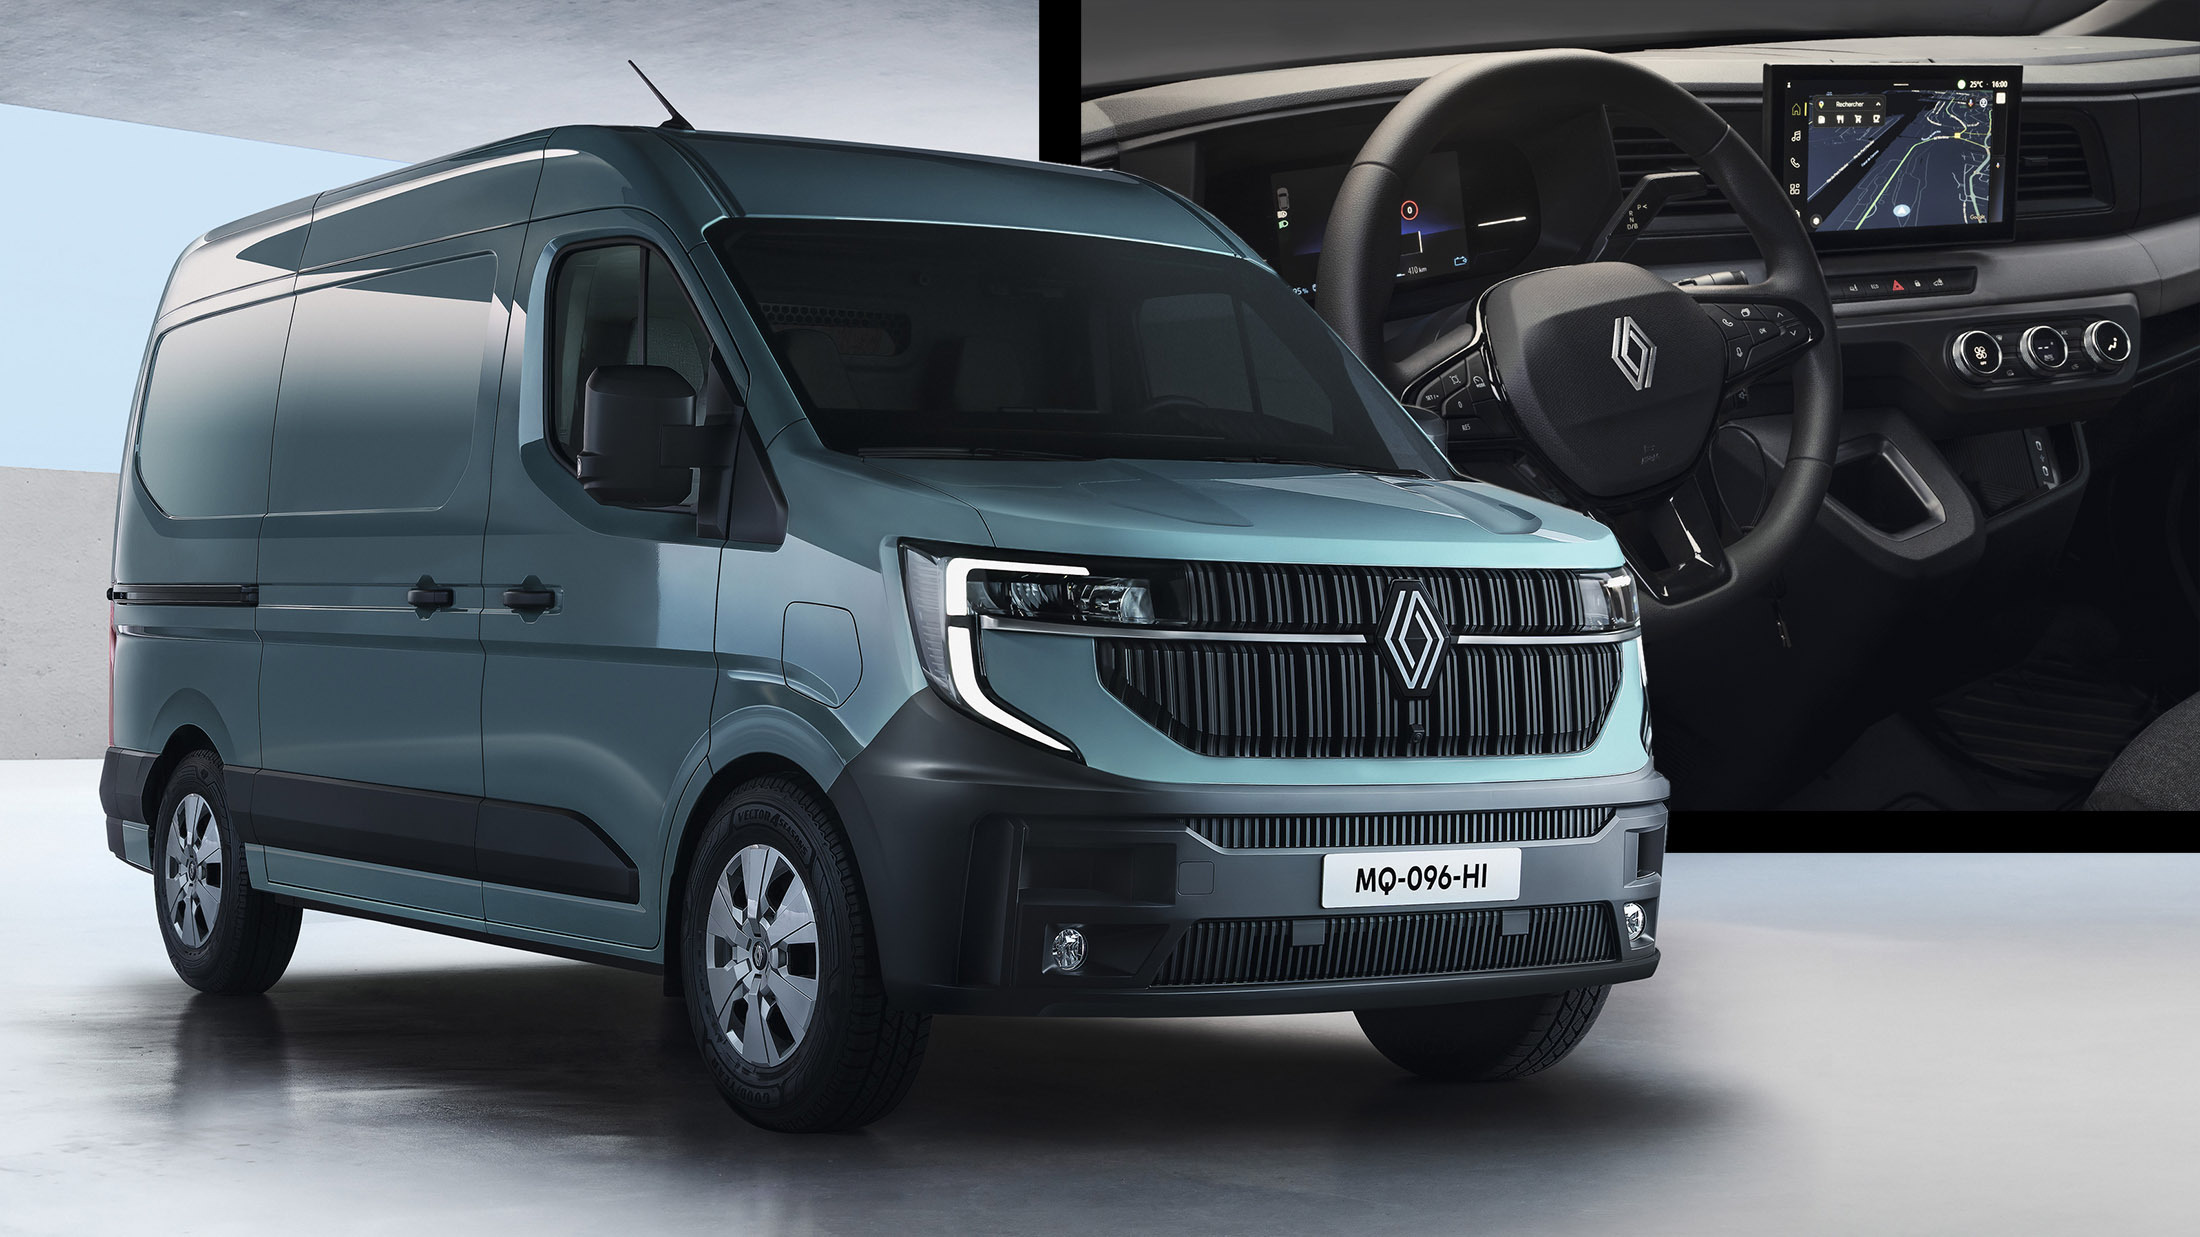 New Renault Trafic for Sale, Deals, Offers